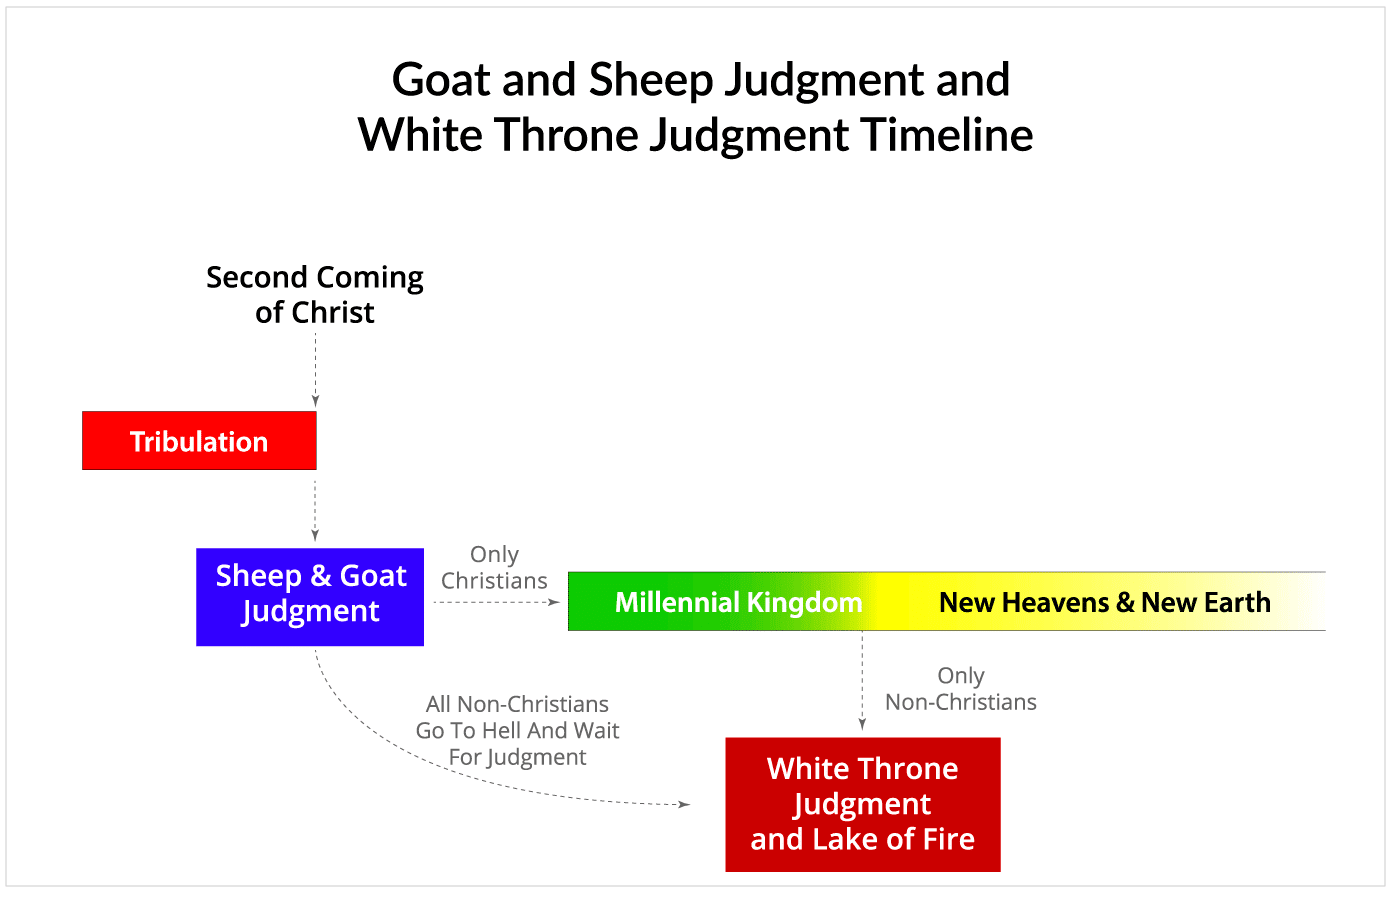 Goat and Sheep Judgment and White Throne Judgment Timeline